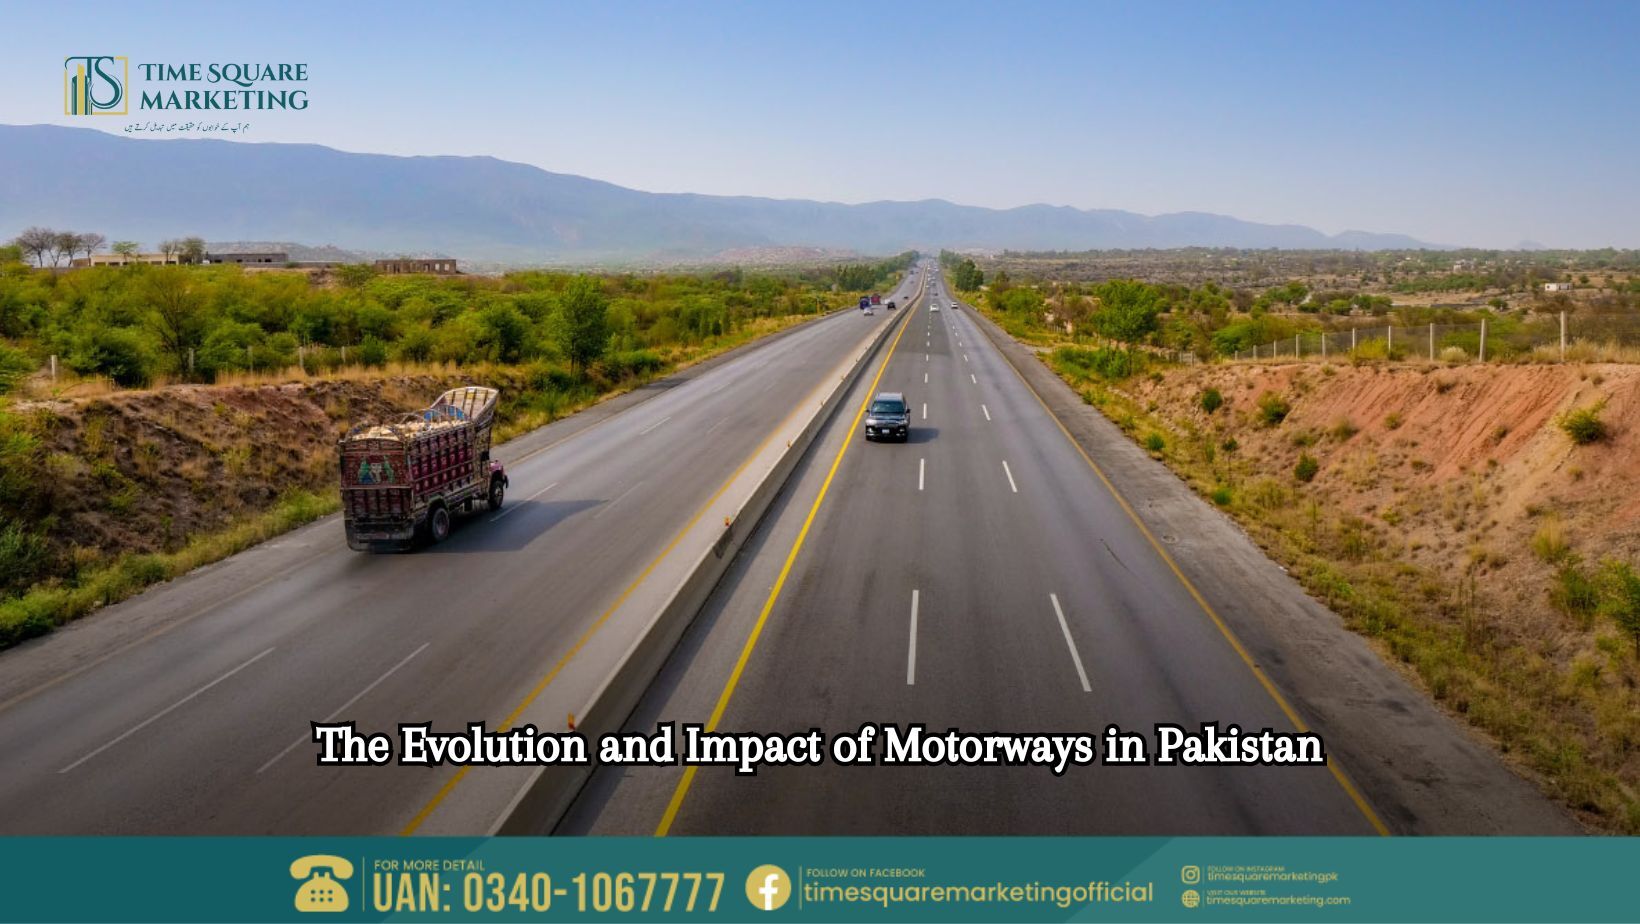 The Evolution and Impact of Motorways in Pakistan